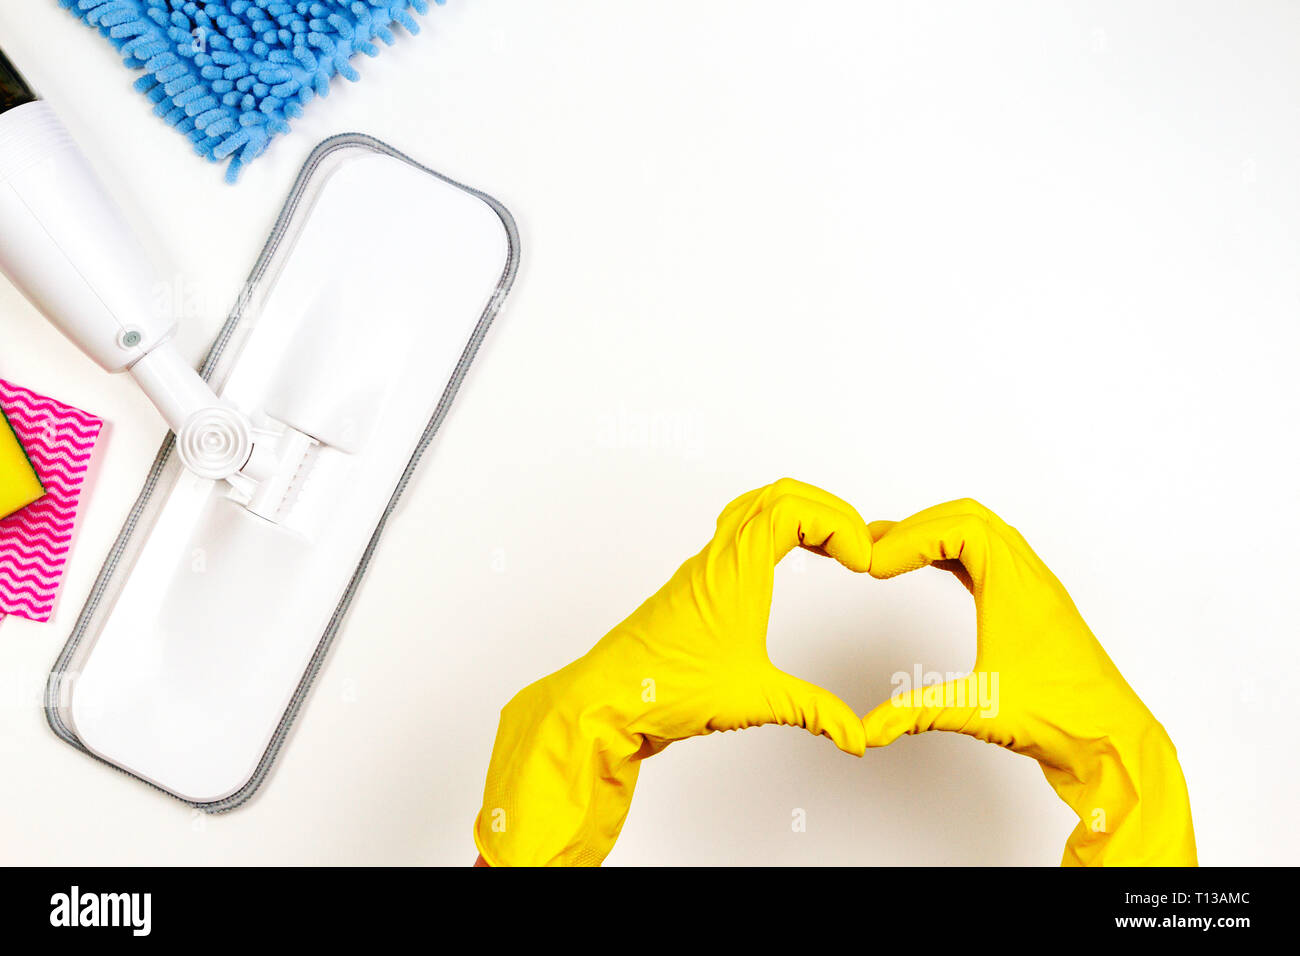 Housework, housekeeping, household, cleaning service concept. Cleaning spray mop, rags, sponges and woman hand with rubber gloves in the form of heart Stock Photo